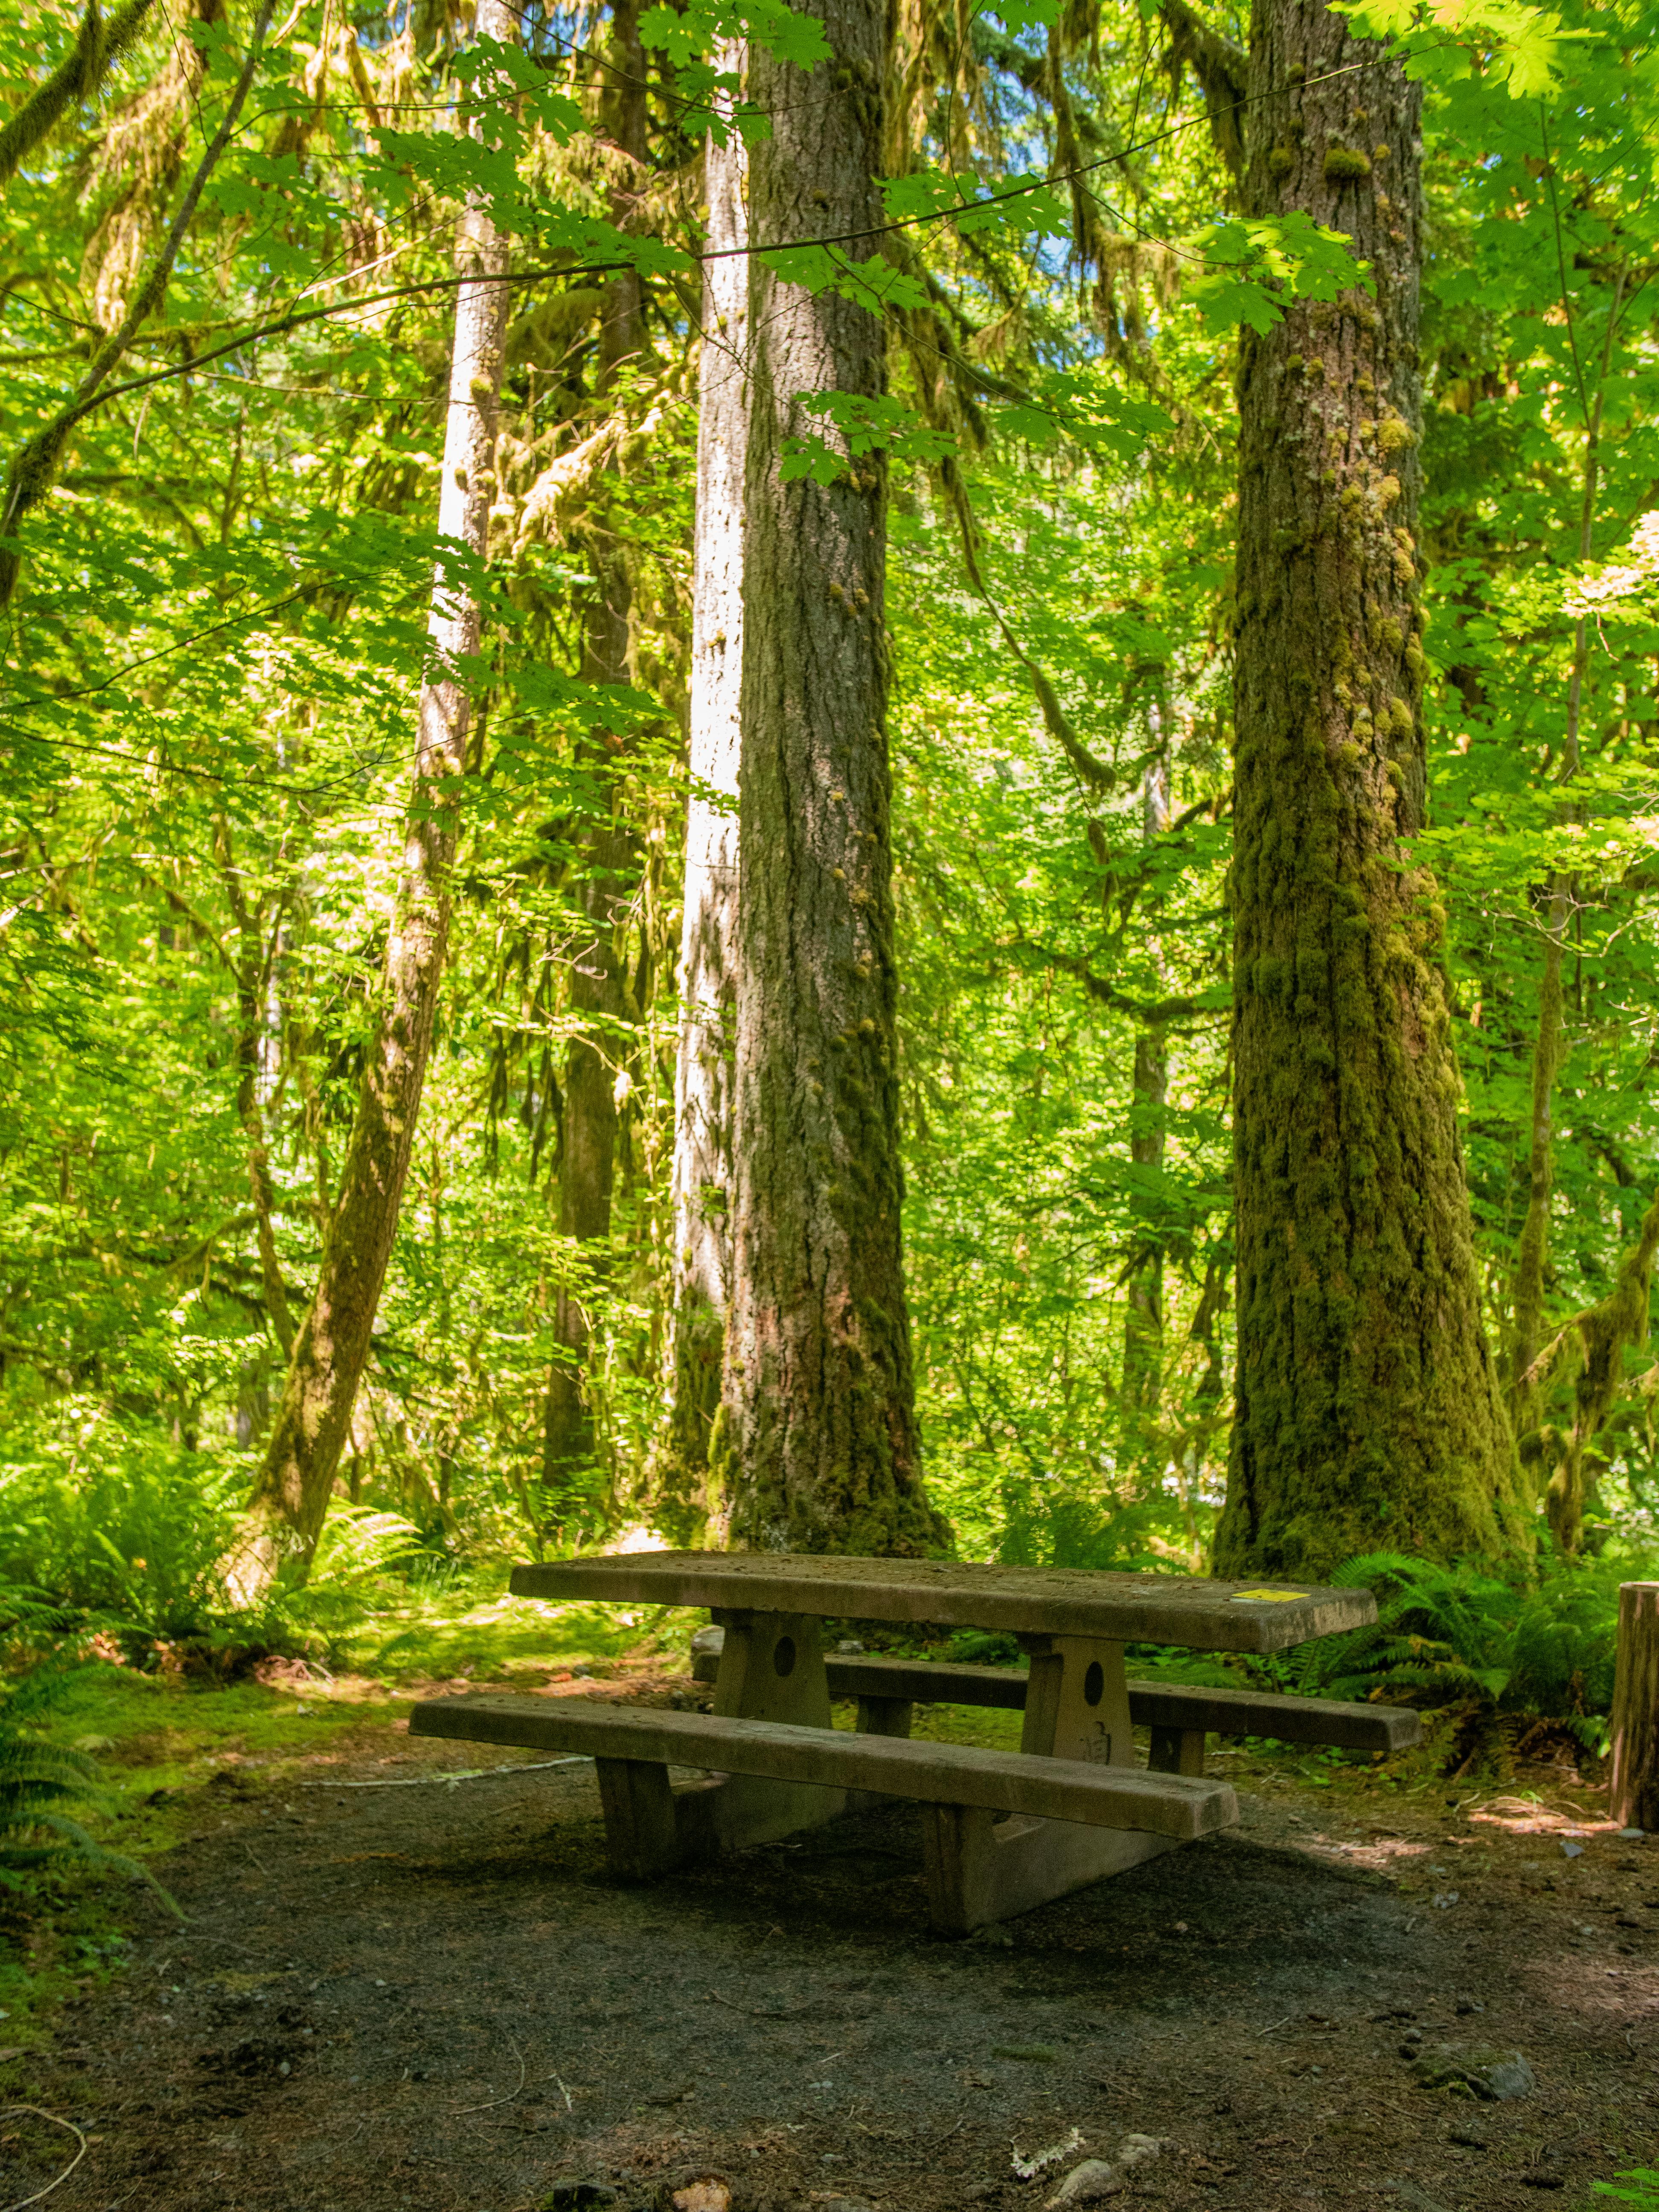 A campsite with a picnic table among tall trees.